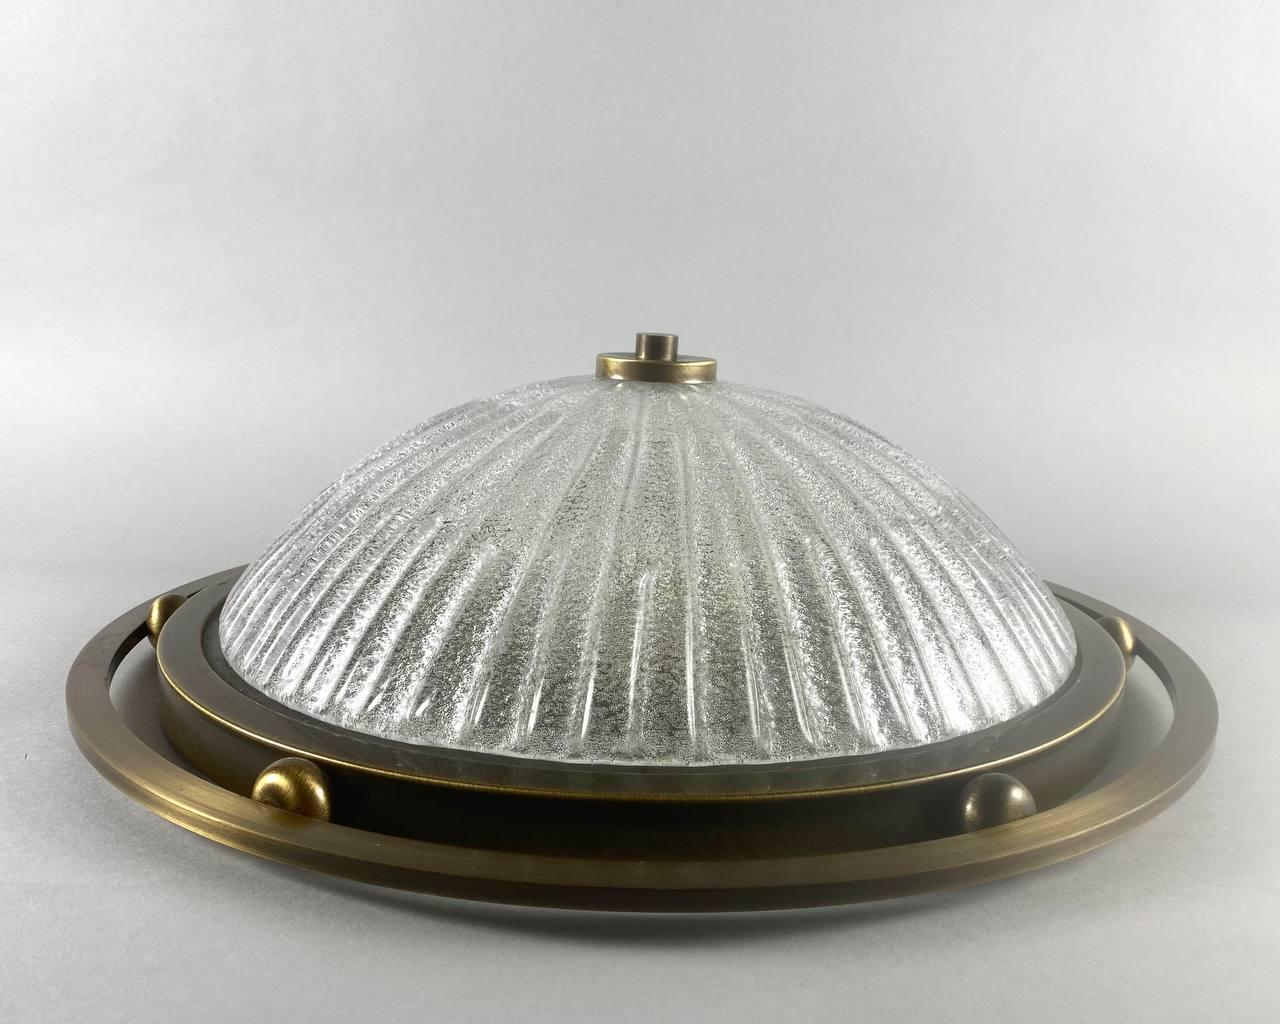 Amazing Vintage Ceiling Lamp. Brass And Glass Large Flush Mount Fixture by Fisher Leuchten, Germany, 1960-70s.

A lamp is a light source that should be in every home. This item of lighting is used in bedrooms, living rooms, kitchens as well as in